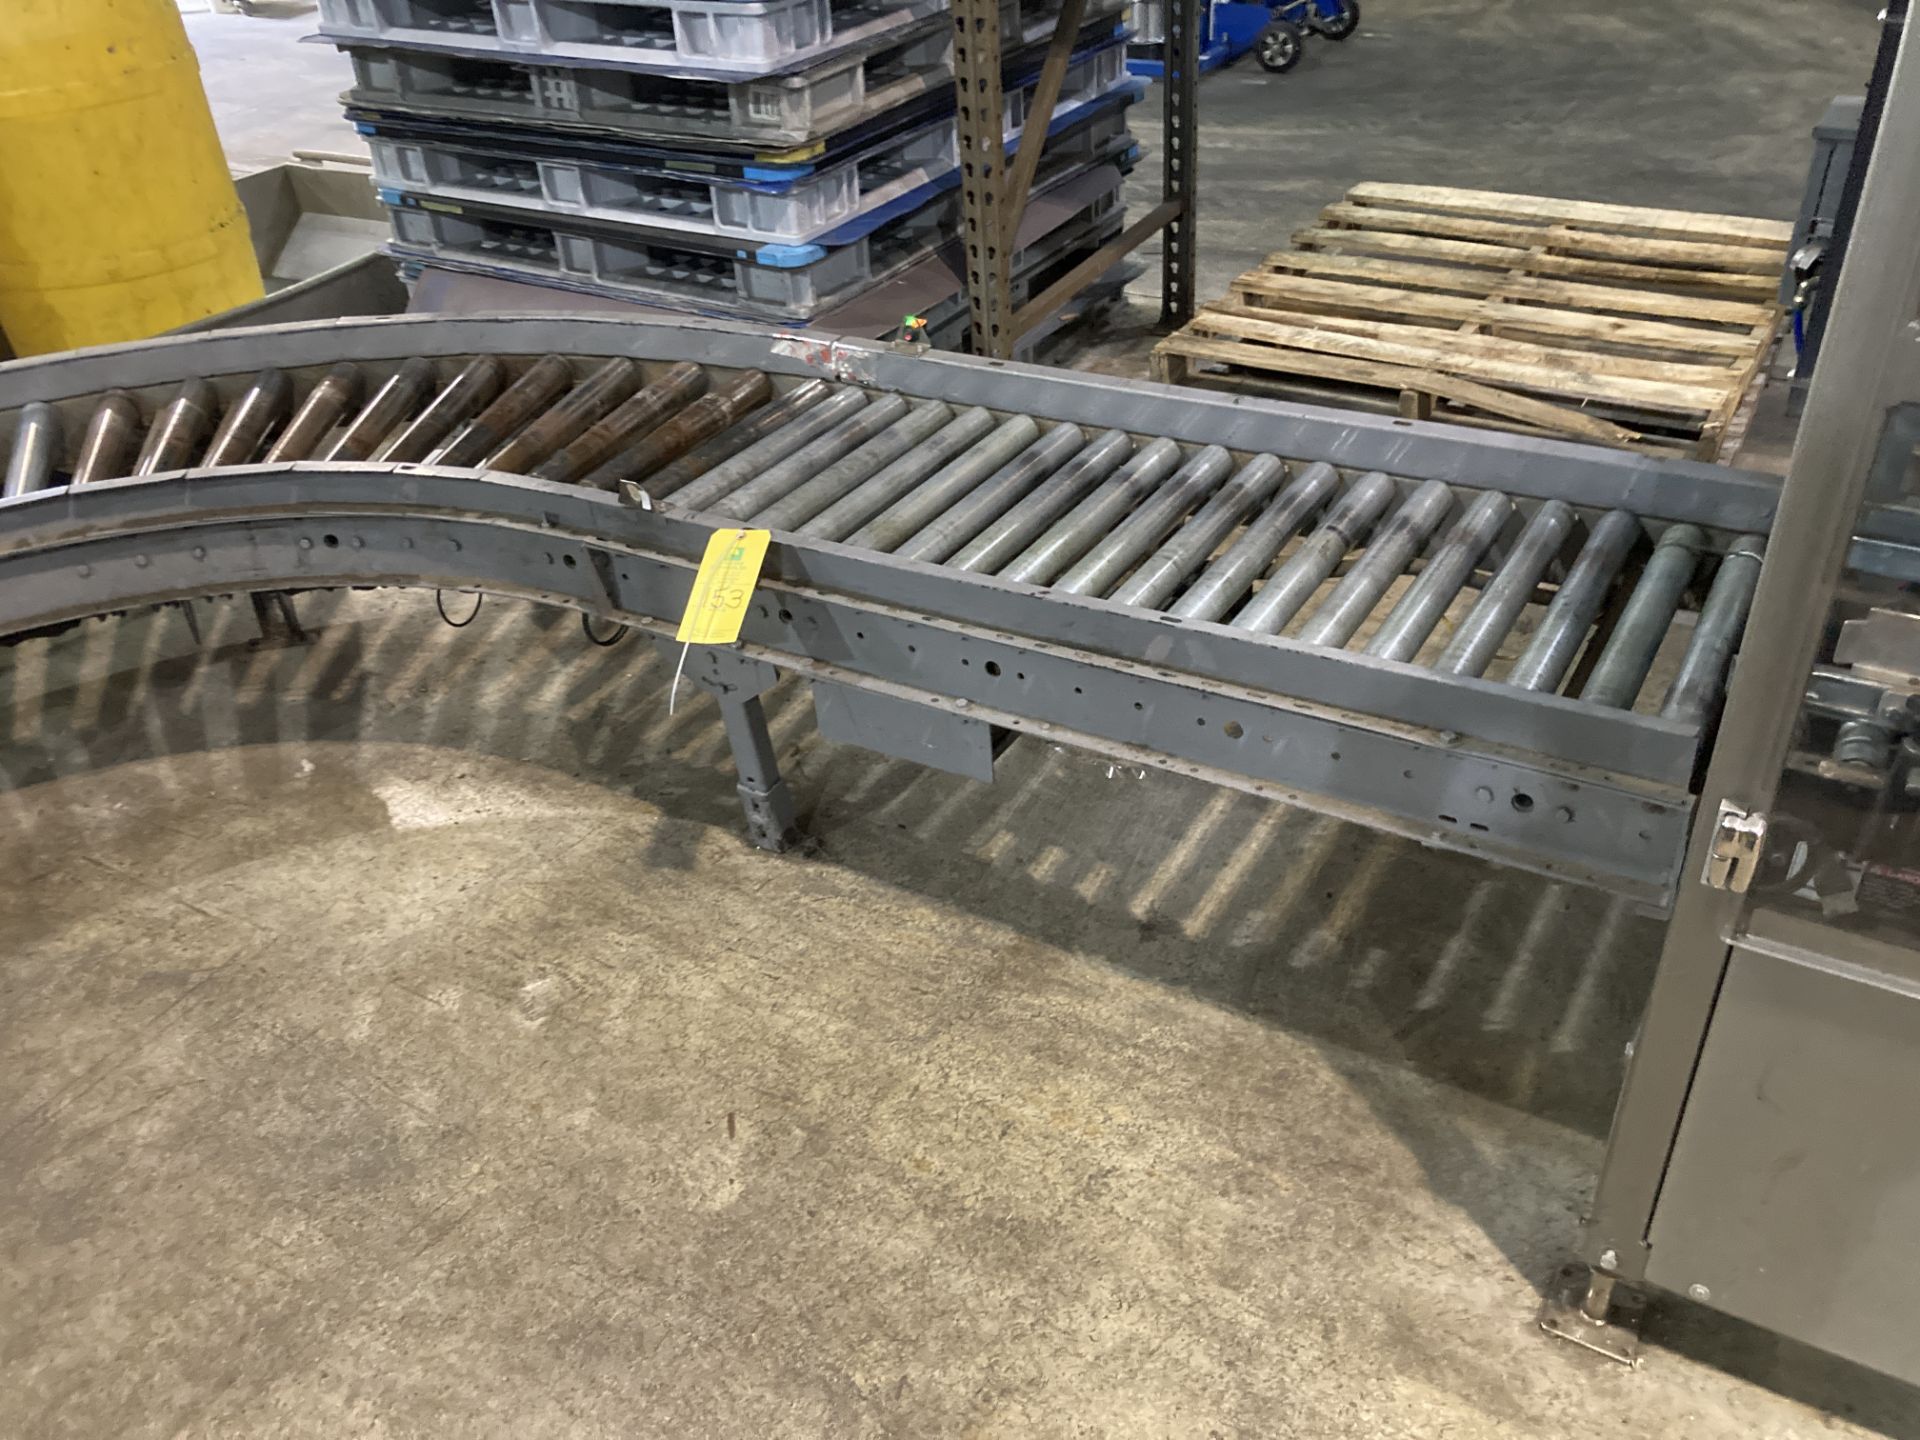 Live roller 180 degree curve conveyor , 22 in wide ***Rigging and Loading Fee of$: TBD will be - Image 2 of 3